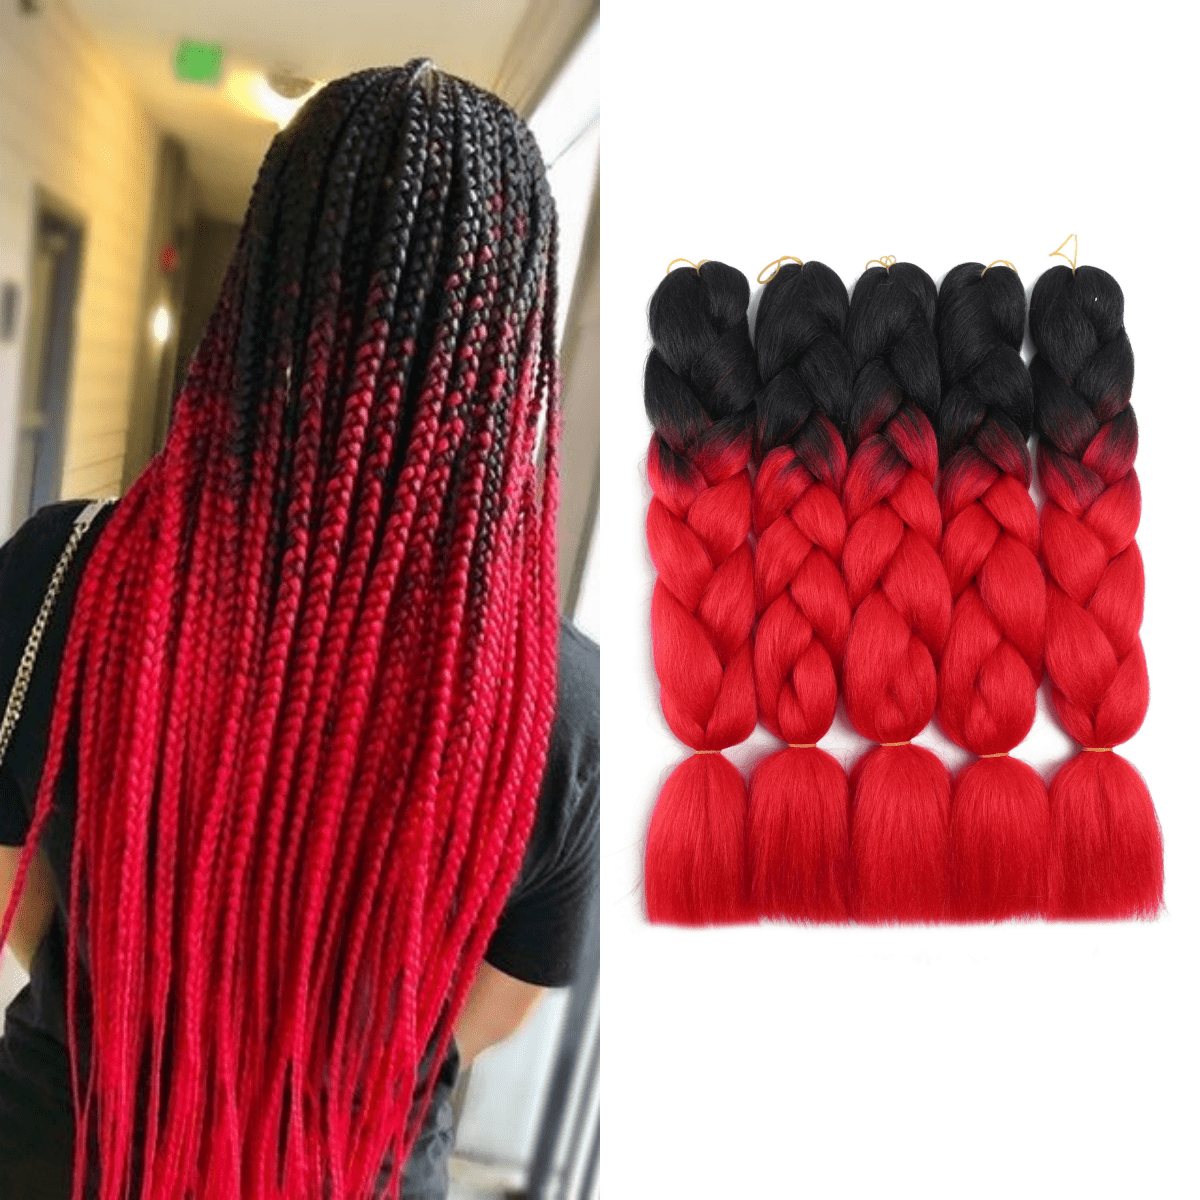 24 Inch Jumbo Braids Hair Extensions Ombre High Temperature Synthetic Hair  African Rainbow Box Braiding Hair for Senegal Twist 100g/pack 2 Tones